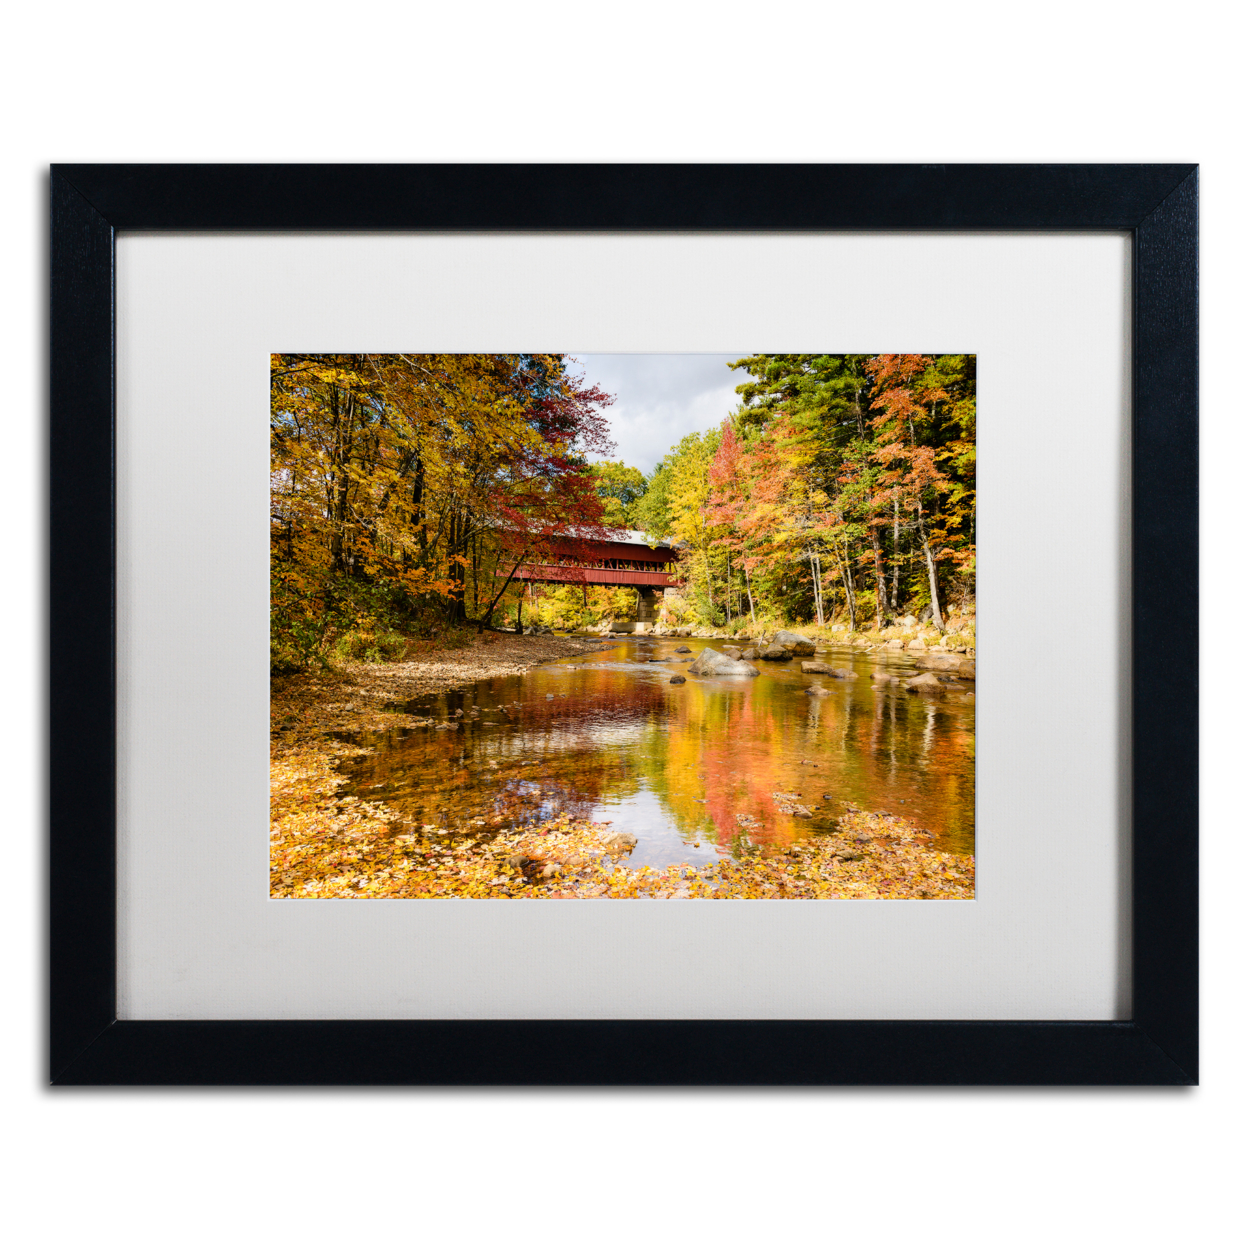 Michael Blanchette Photography 'Along Swift River' Black Wooden Framed Art 18 X 22 Inches